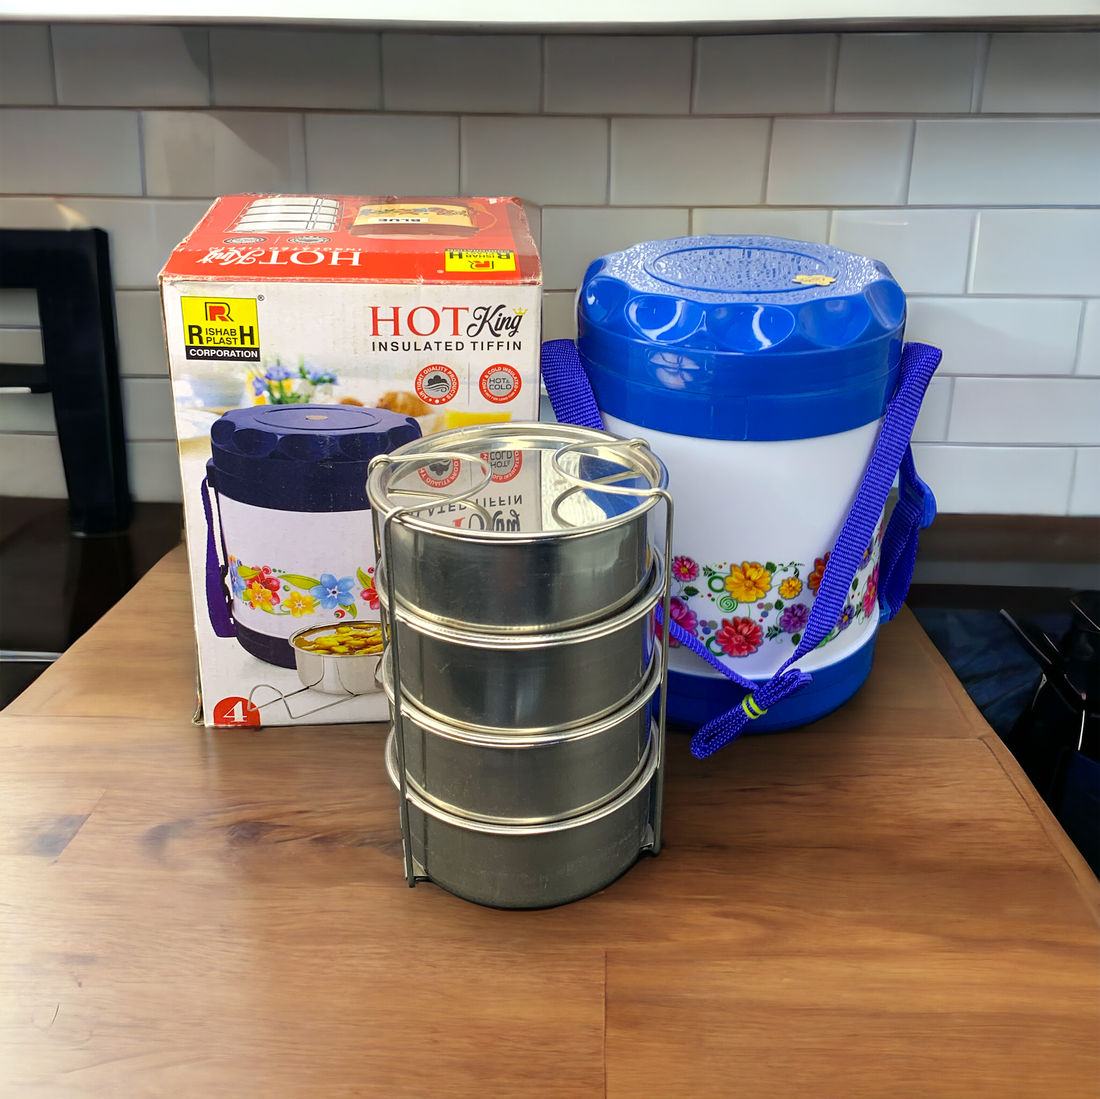 Hot King Insulated Stainless Steel Tiffin Box: 4 Layer